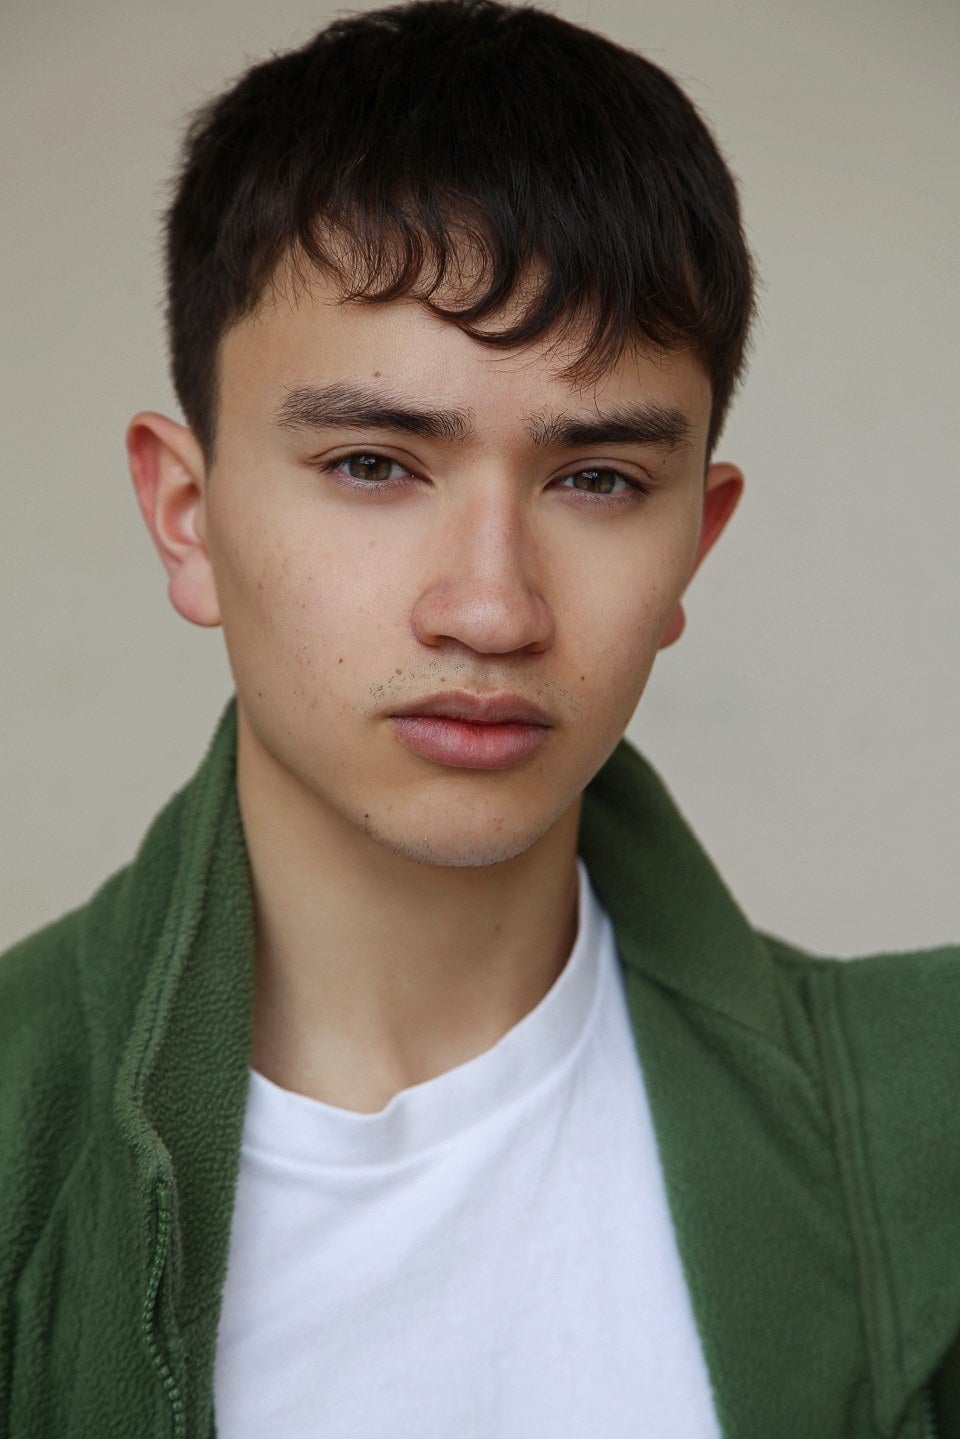 HIROKI BERRECLOTH joins the cast of the Hunger Games 